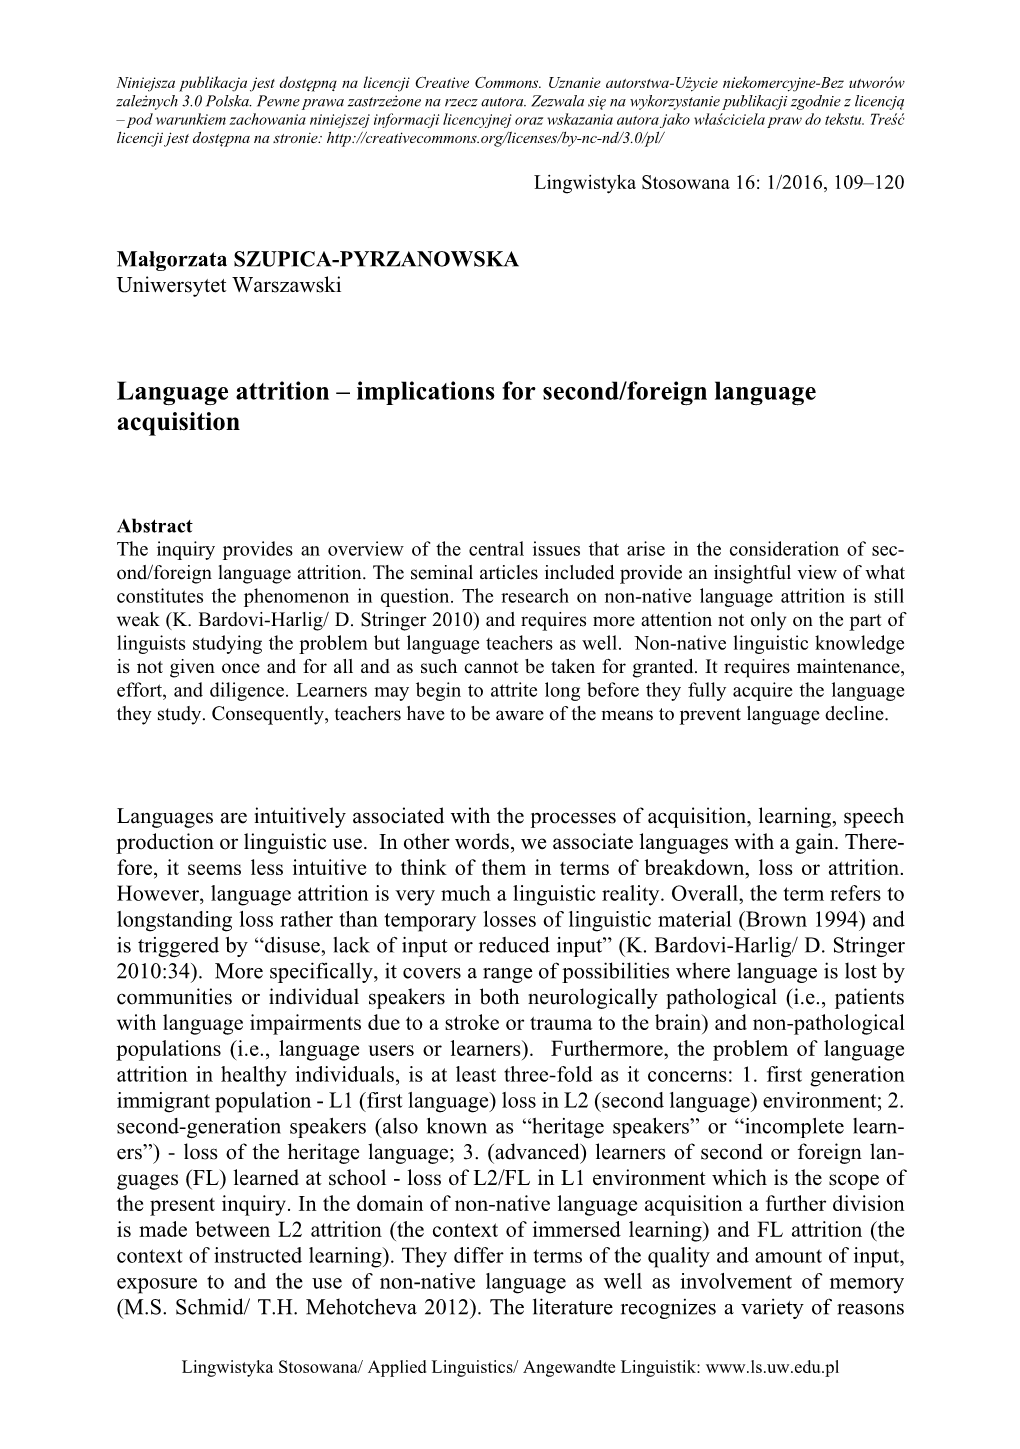 Language Attrition – Implications for Second/Foreign Language Acquisition